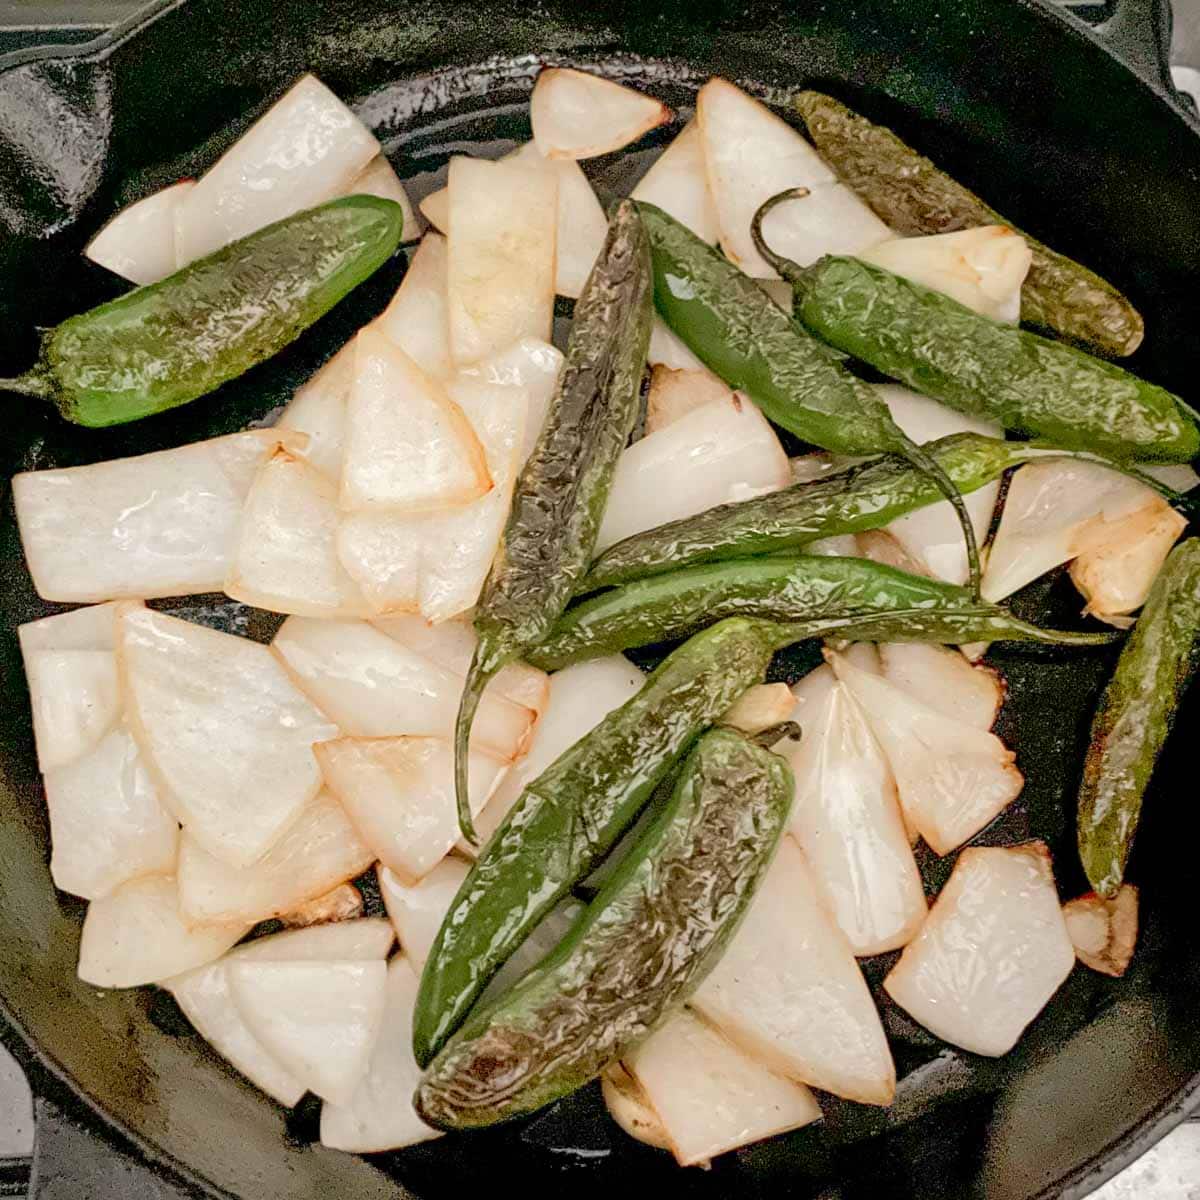 Cooked serranos, onion, and garlic are shown in a cast iron pan.